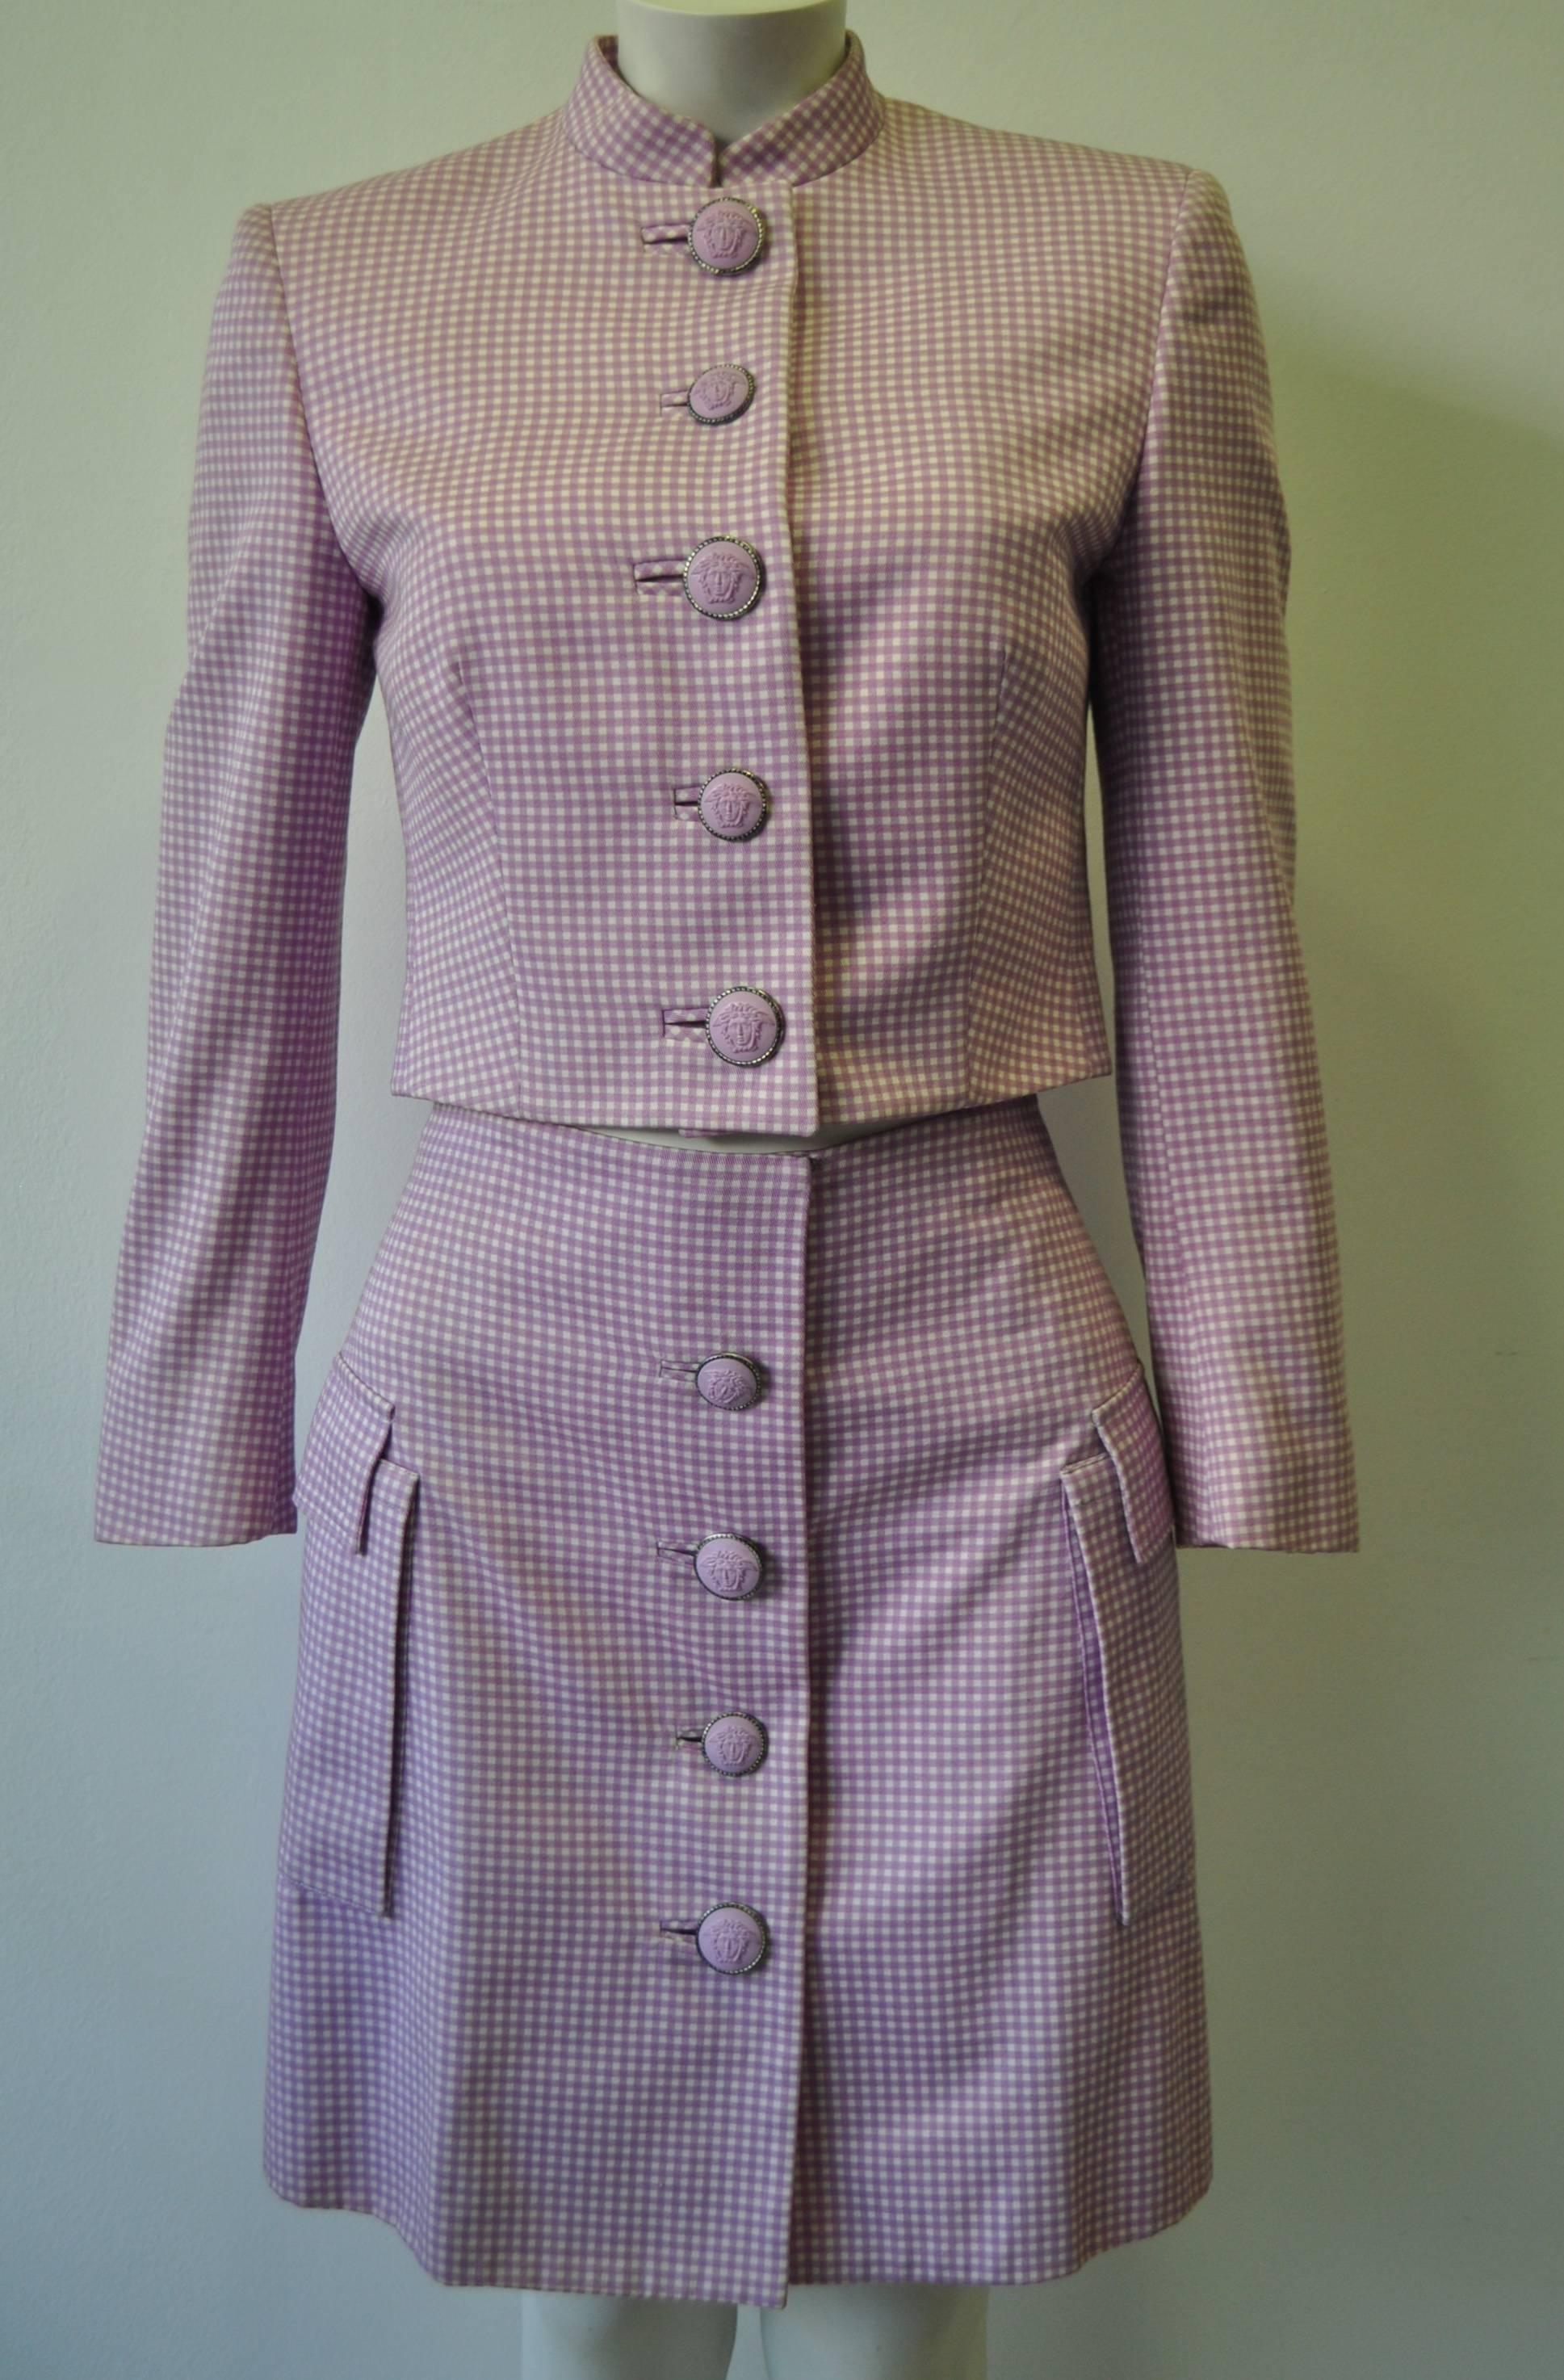 Exceptional Gianni Versace Couture Lilac Cotton Check Skirt Suit featuring Iconic Medusa Buttons